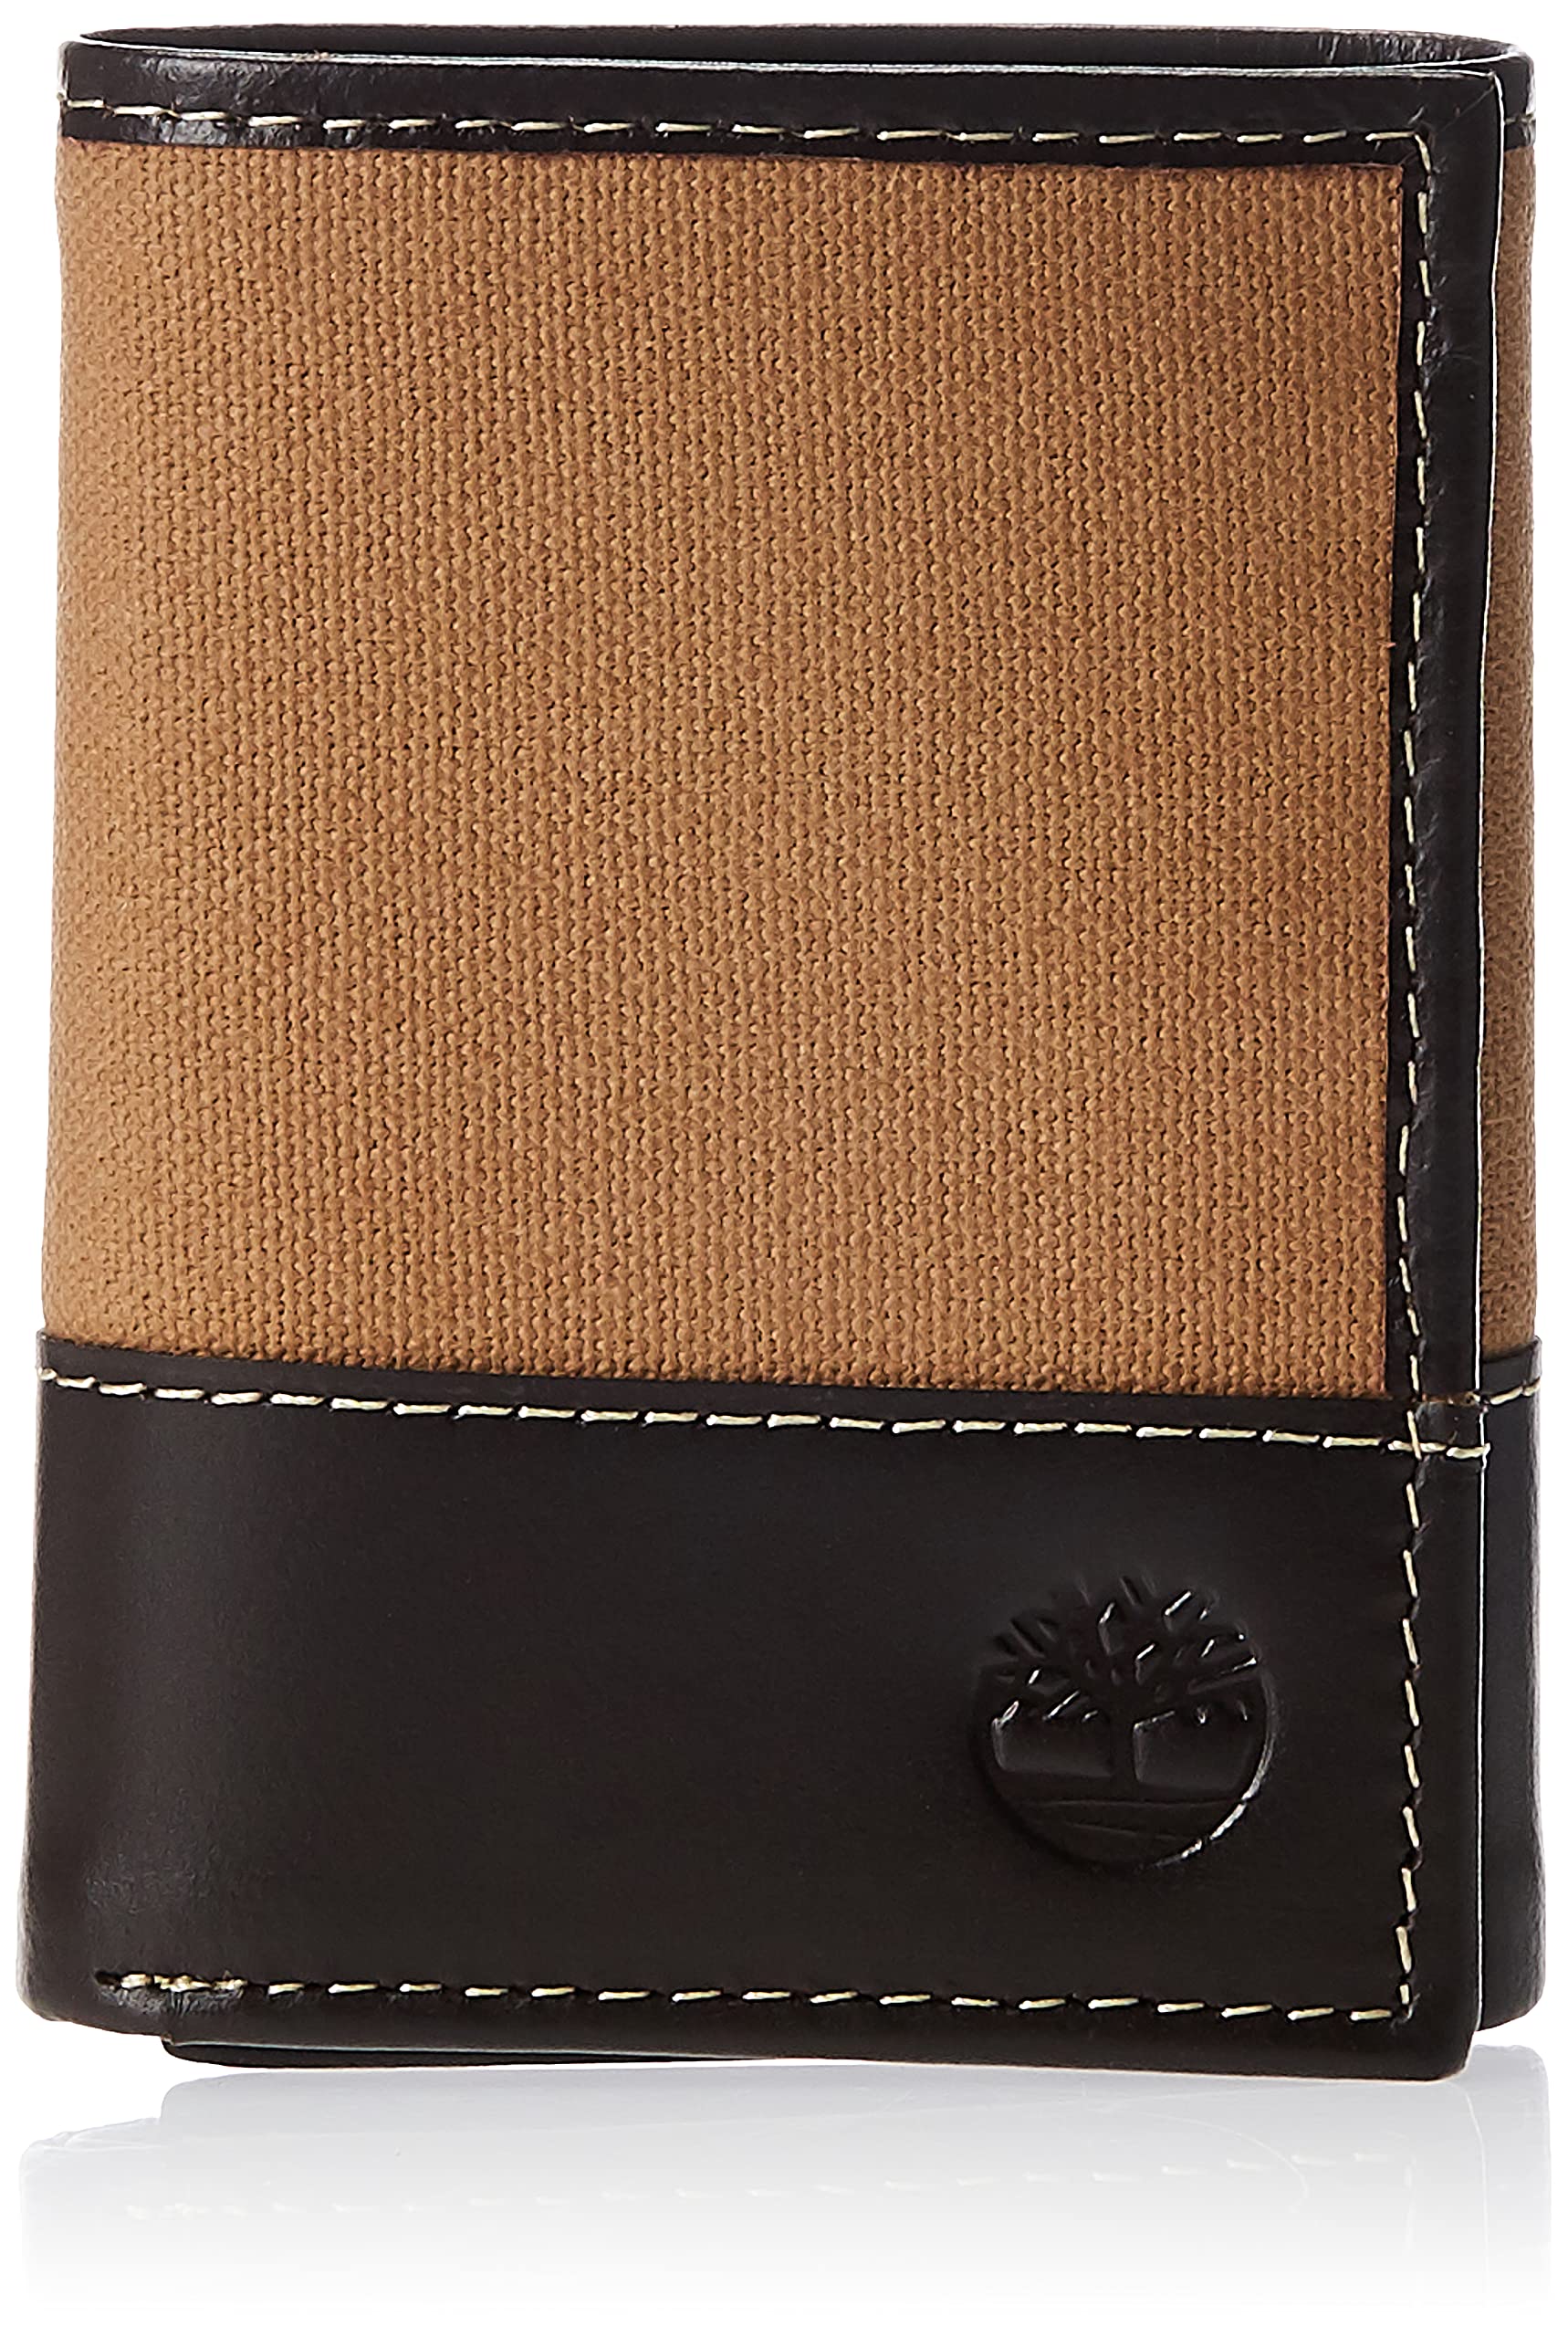 Timberland Men's Canvas & Leather Trifold Wallet